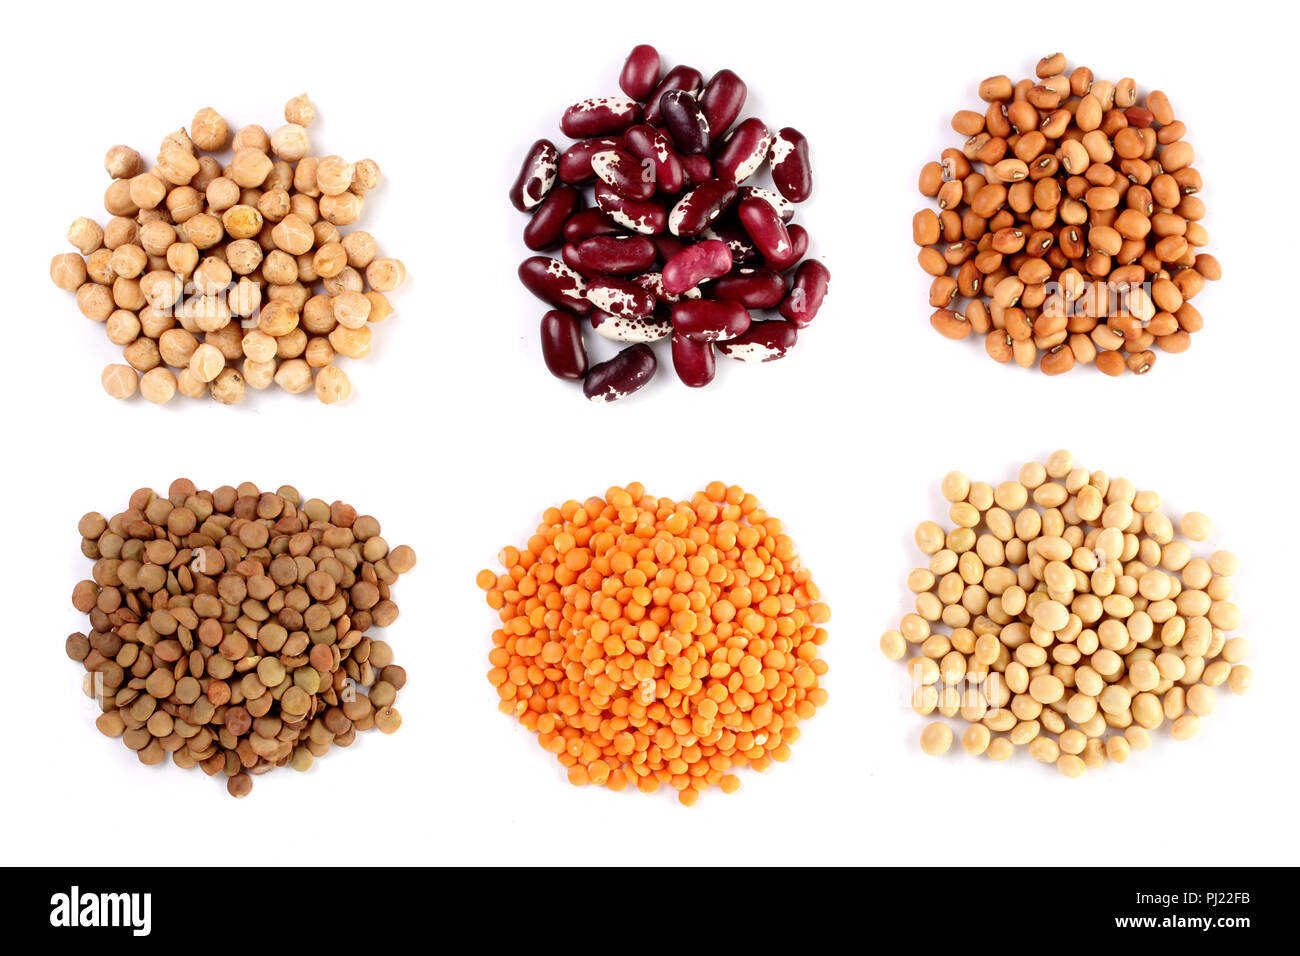 Collection set of Various dried kidney legumes haricot beans, soybeans, lentils, chickpeas close up isolated on white background. Stock Photo